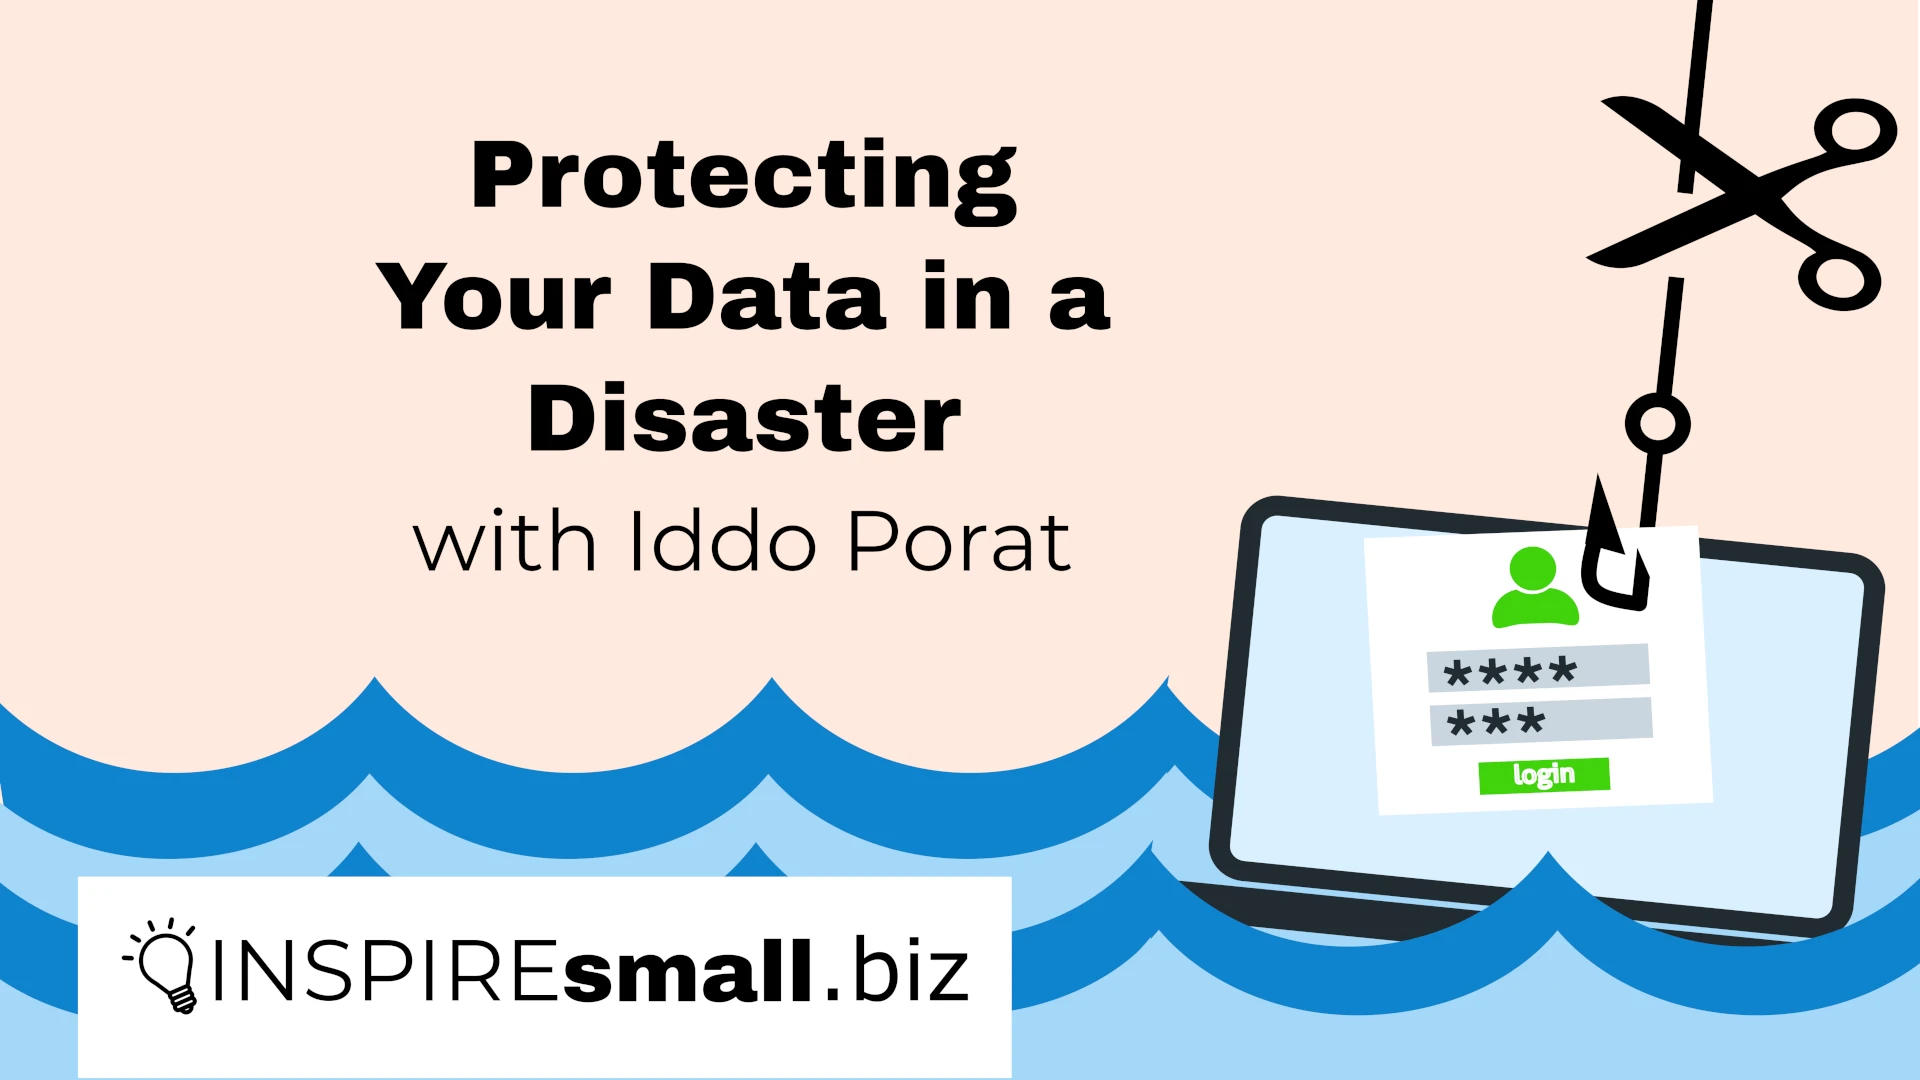 Protecting Your Data in a Disaster